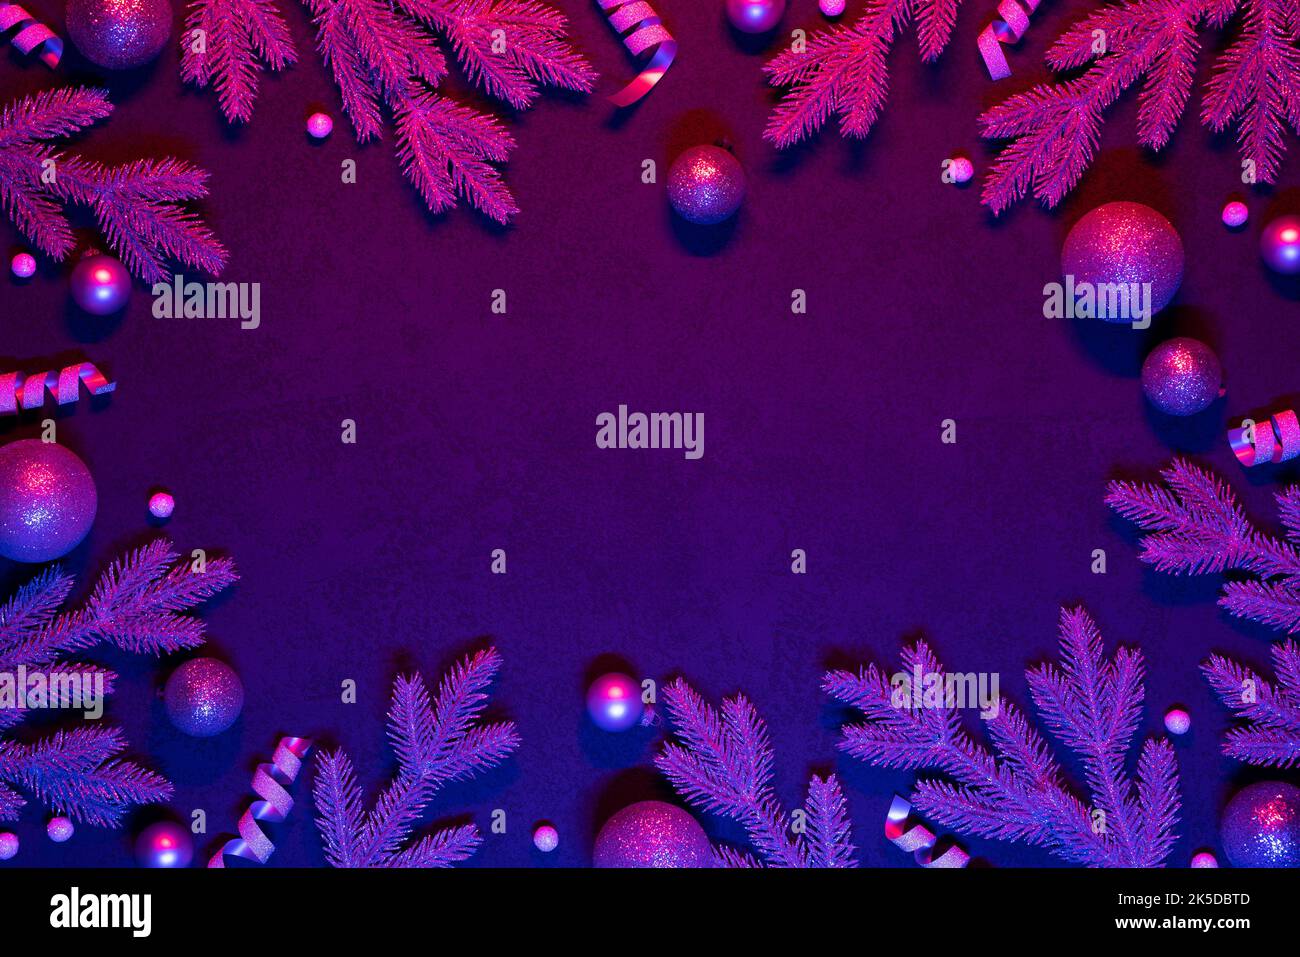 Christmas background in neon light with frame Stock Photo